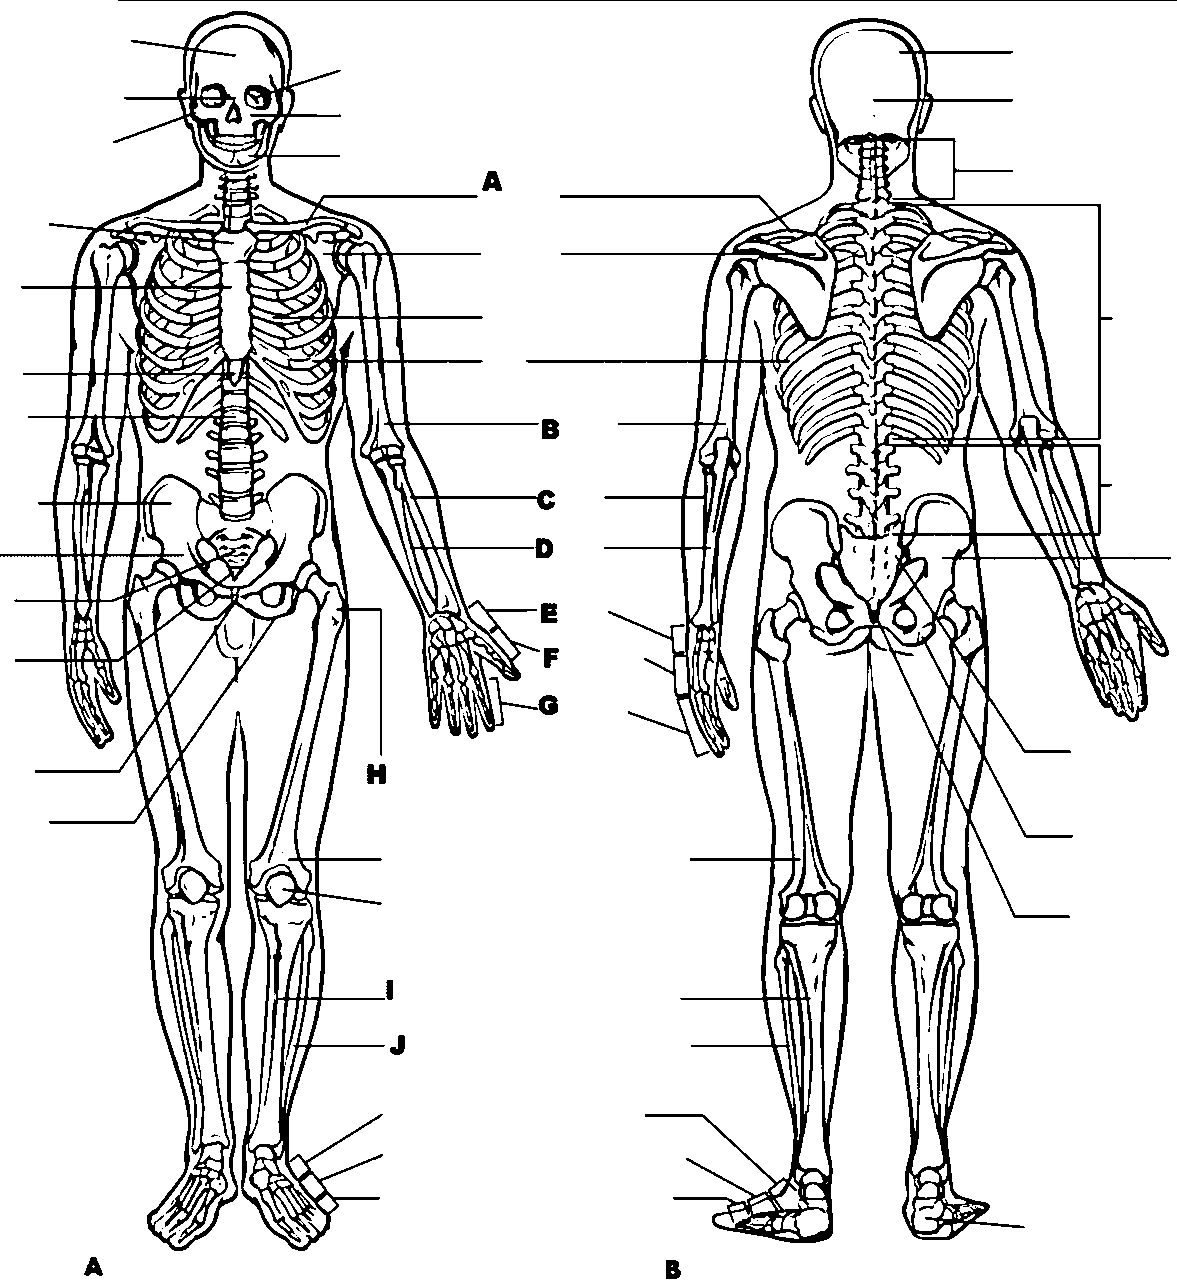 Anatomy And Physiology Coloring Page 04 | Wecoloringpage